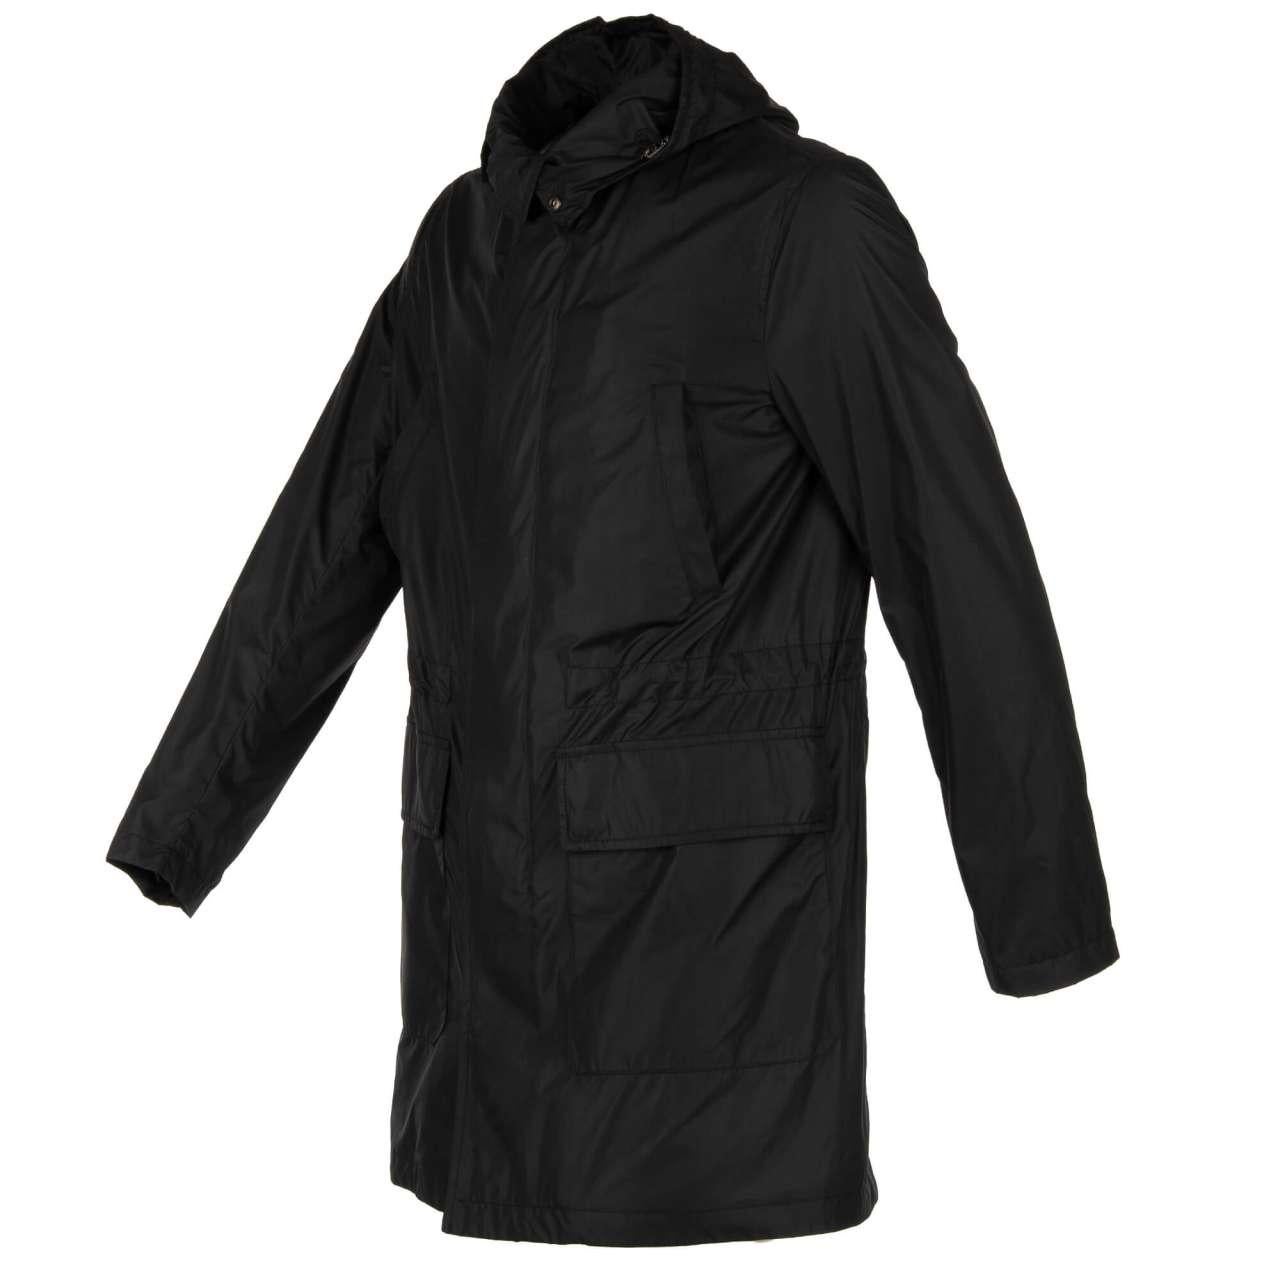 Dolce & Gabbana Classic Rain Parka Jacket with Pockets and Hoody Black 46 In Excellent Condition For Sale In Erkrath, DE